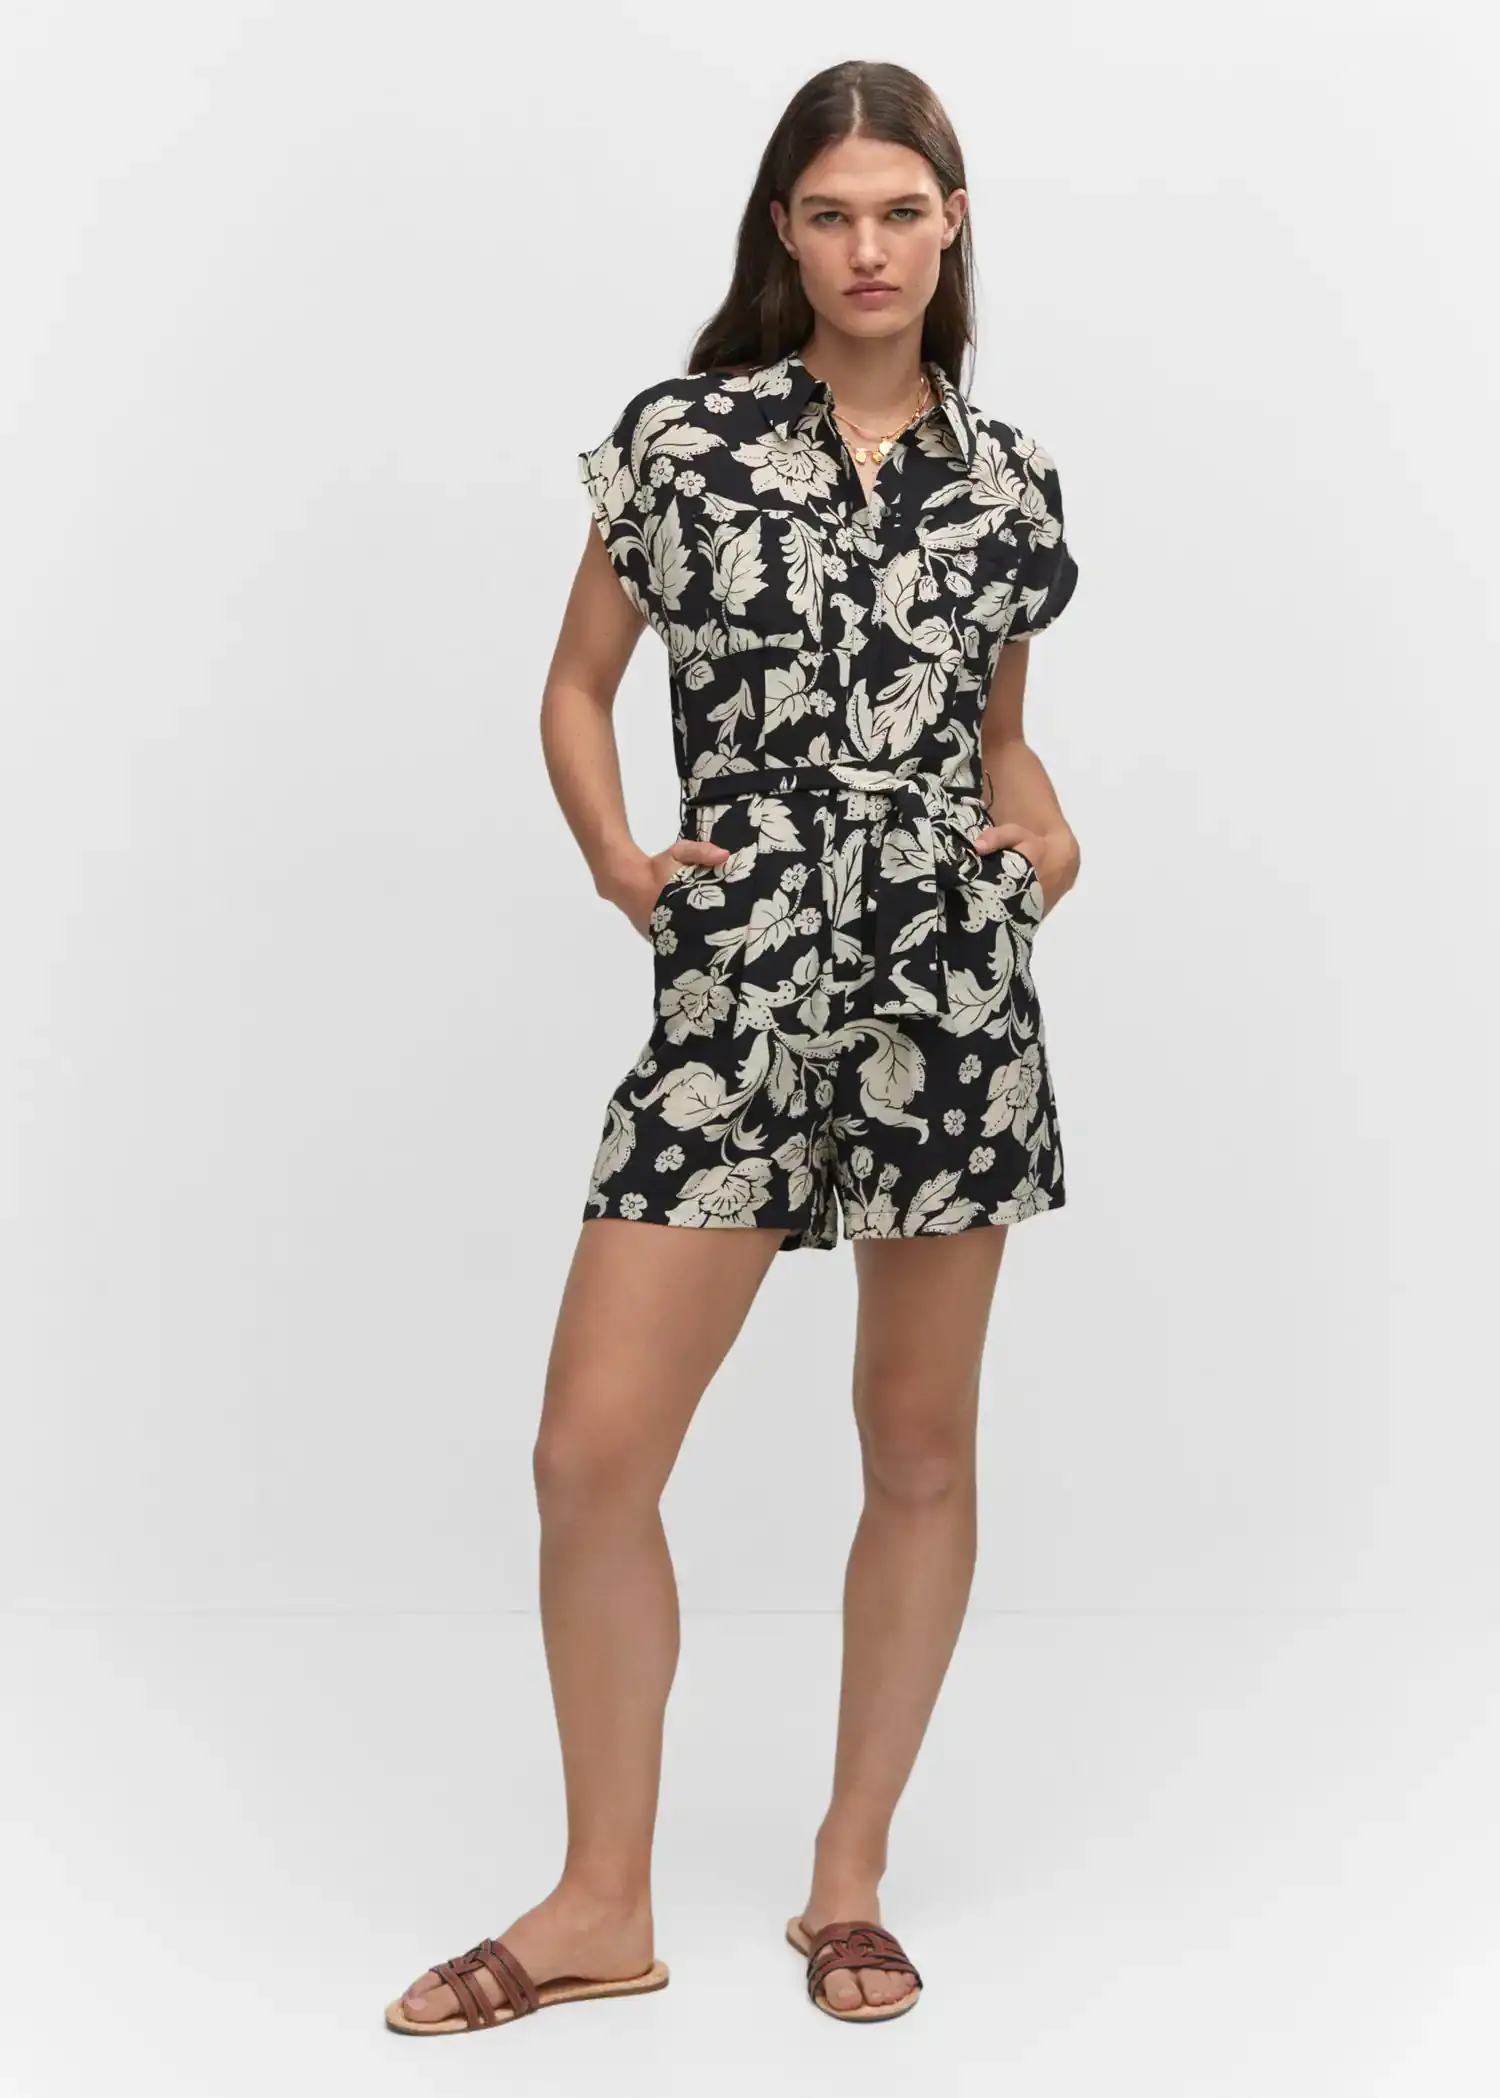 Mango Floral-print jumpsuit with tie. a woman in a black and white floral dress. 